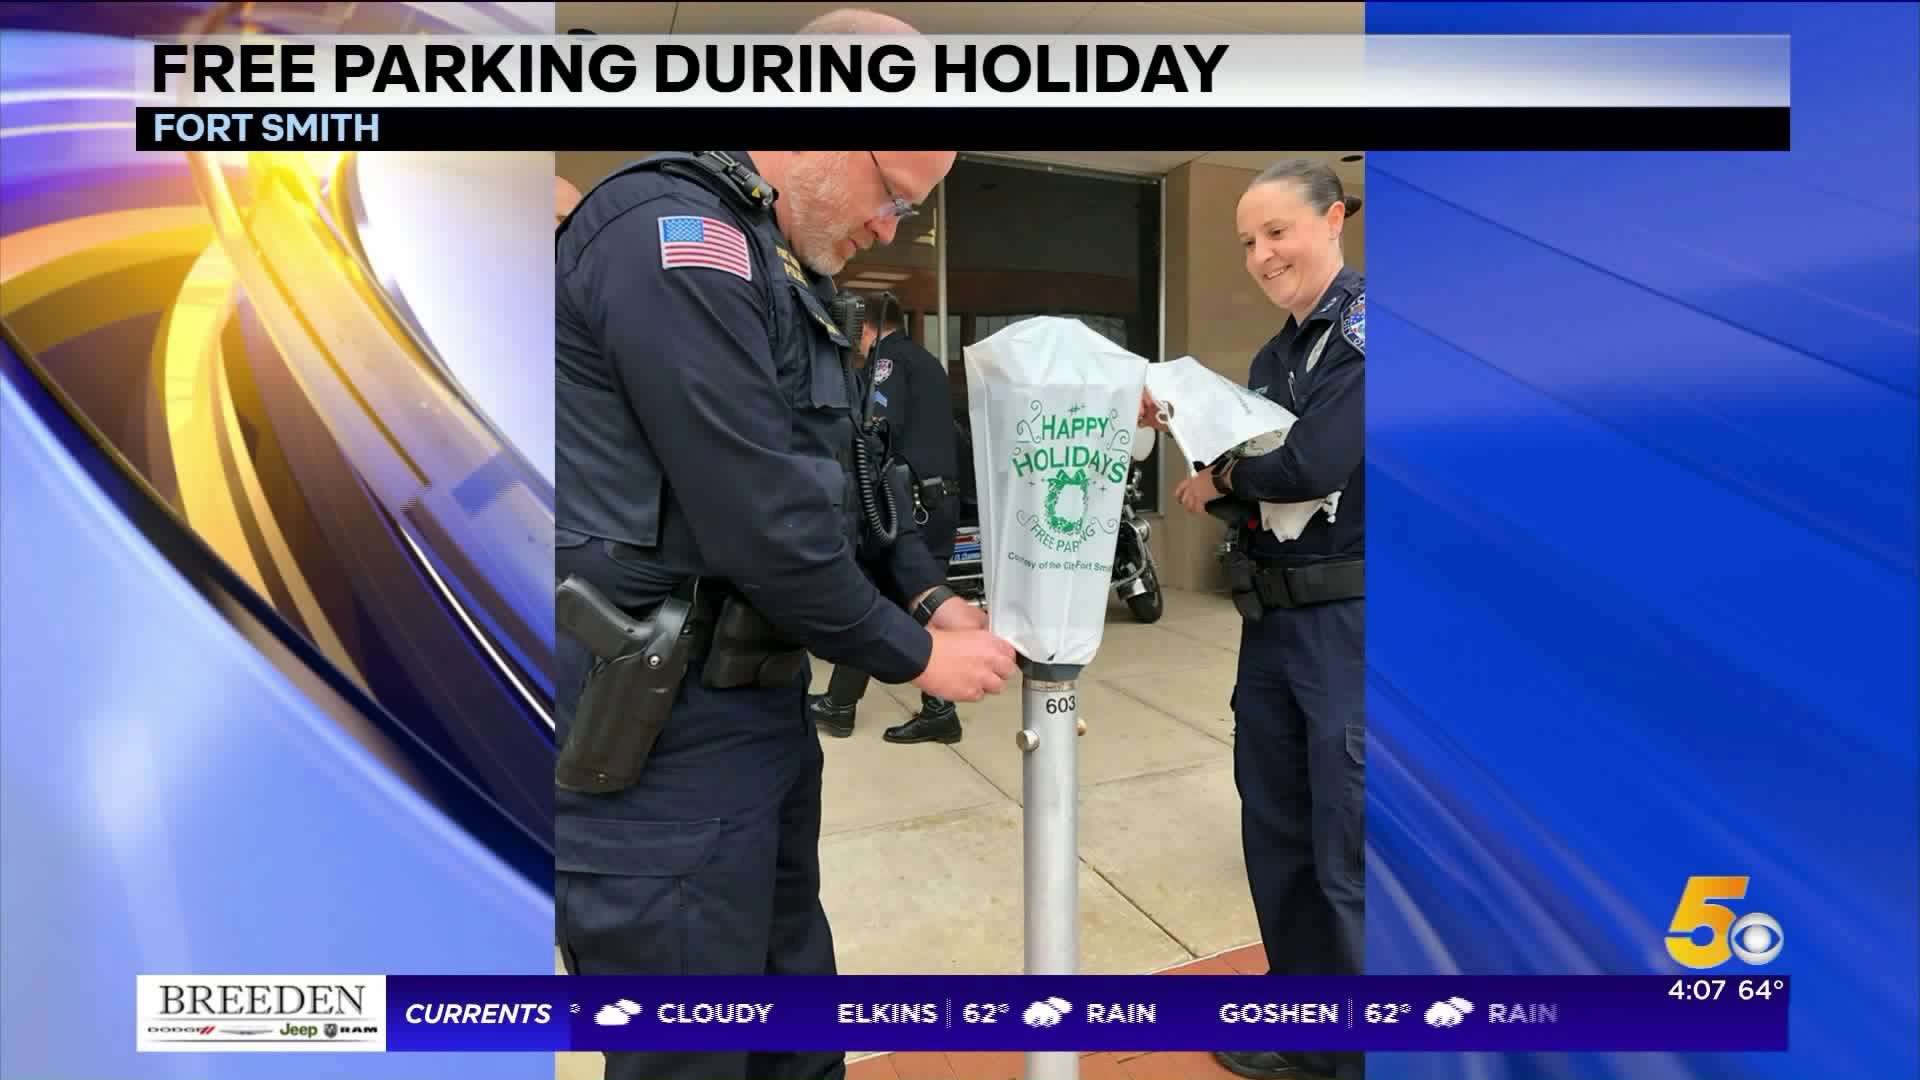 FSPD `Bags The Meters` For Free Holiday Parking